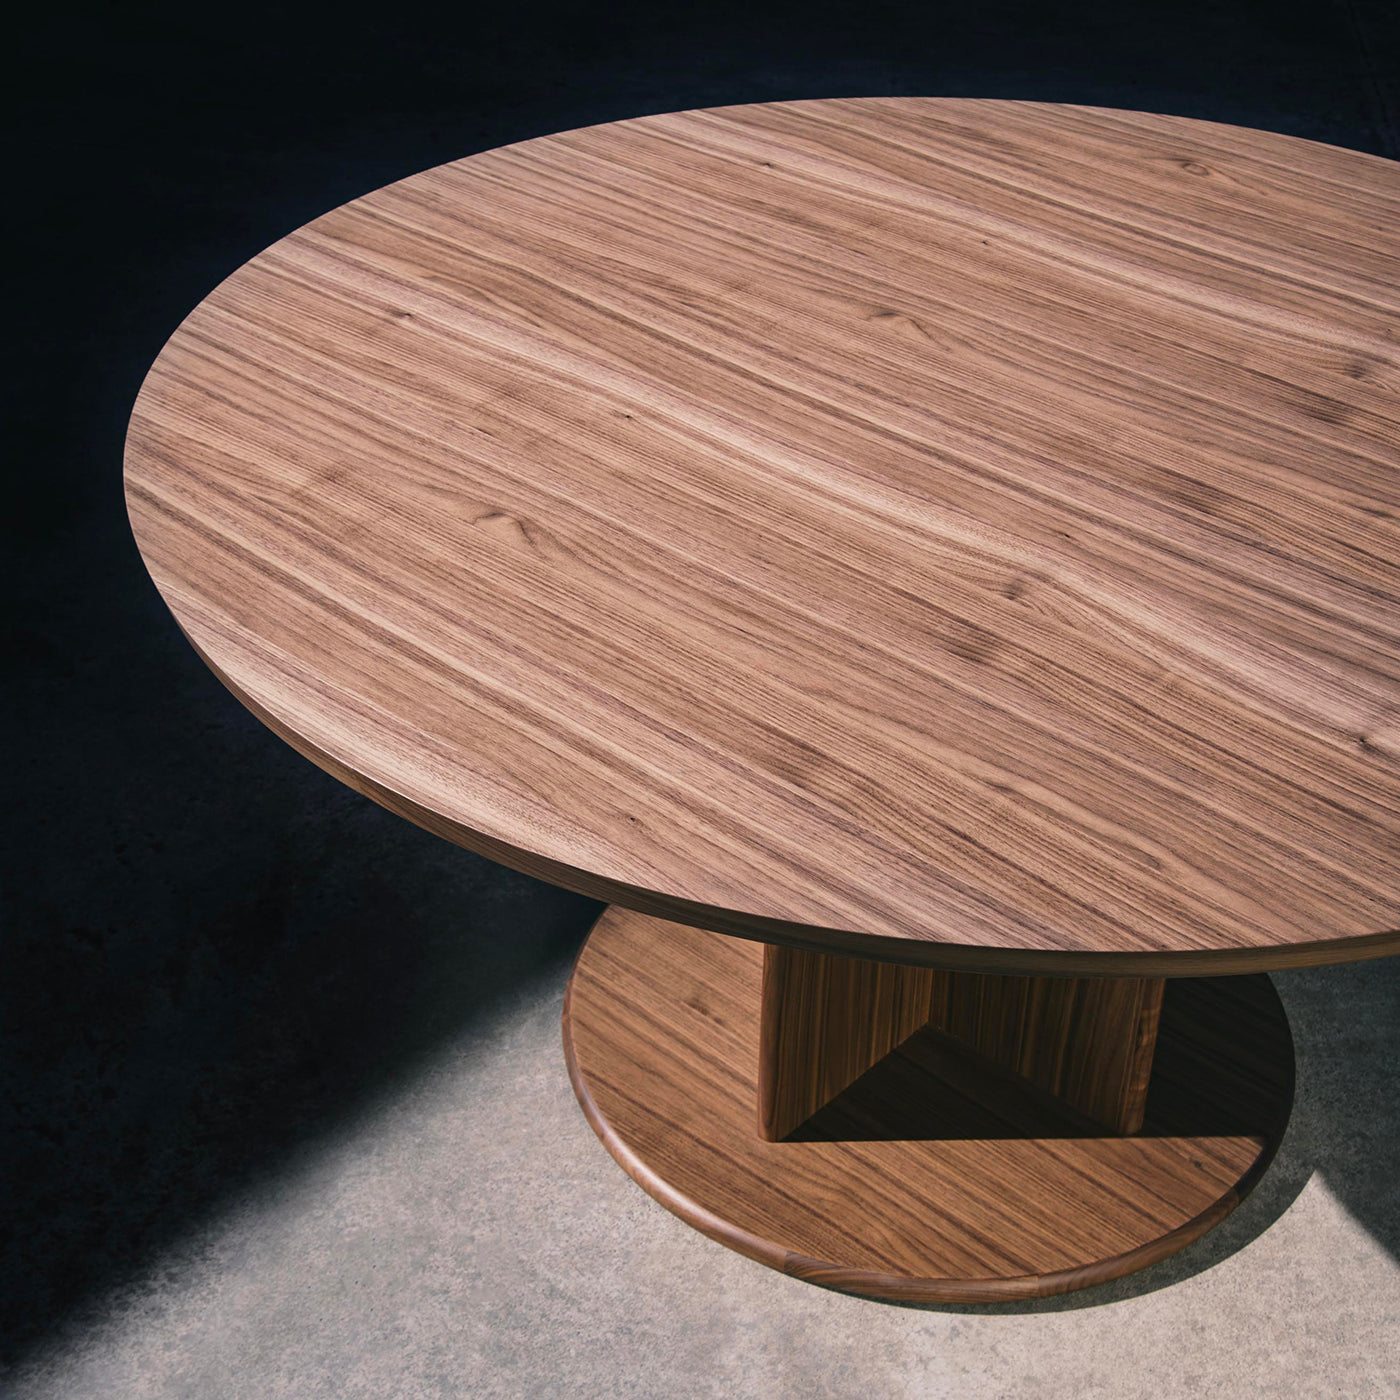 Intersection Round Dining Table by Neri&Hu - Alternative view 3